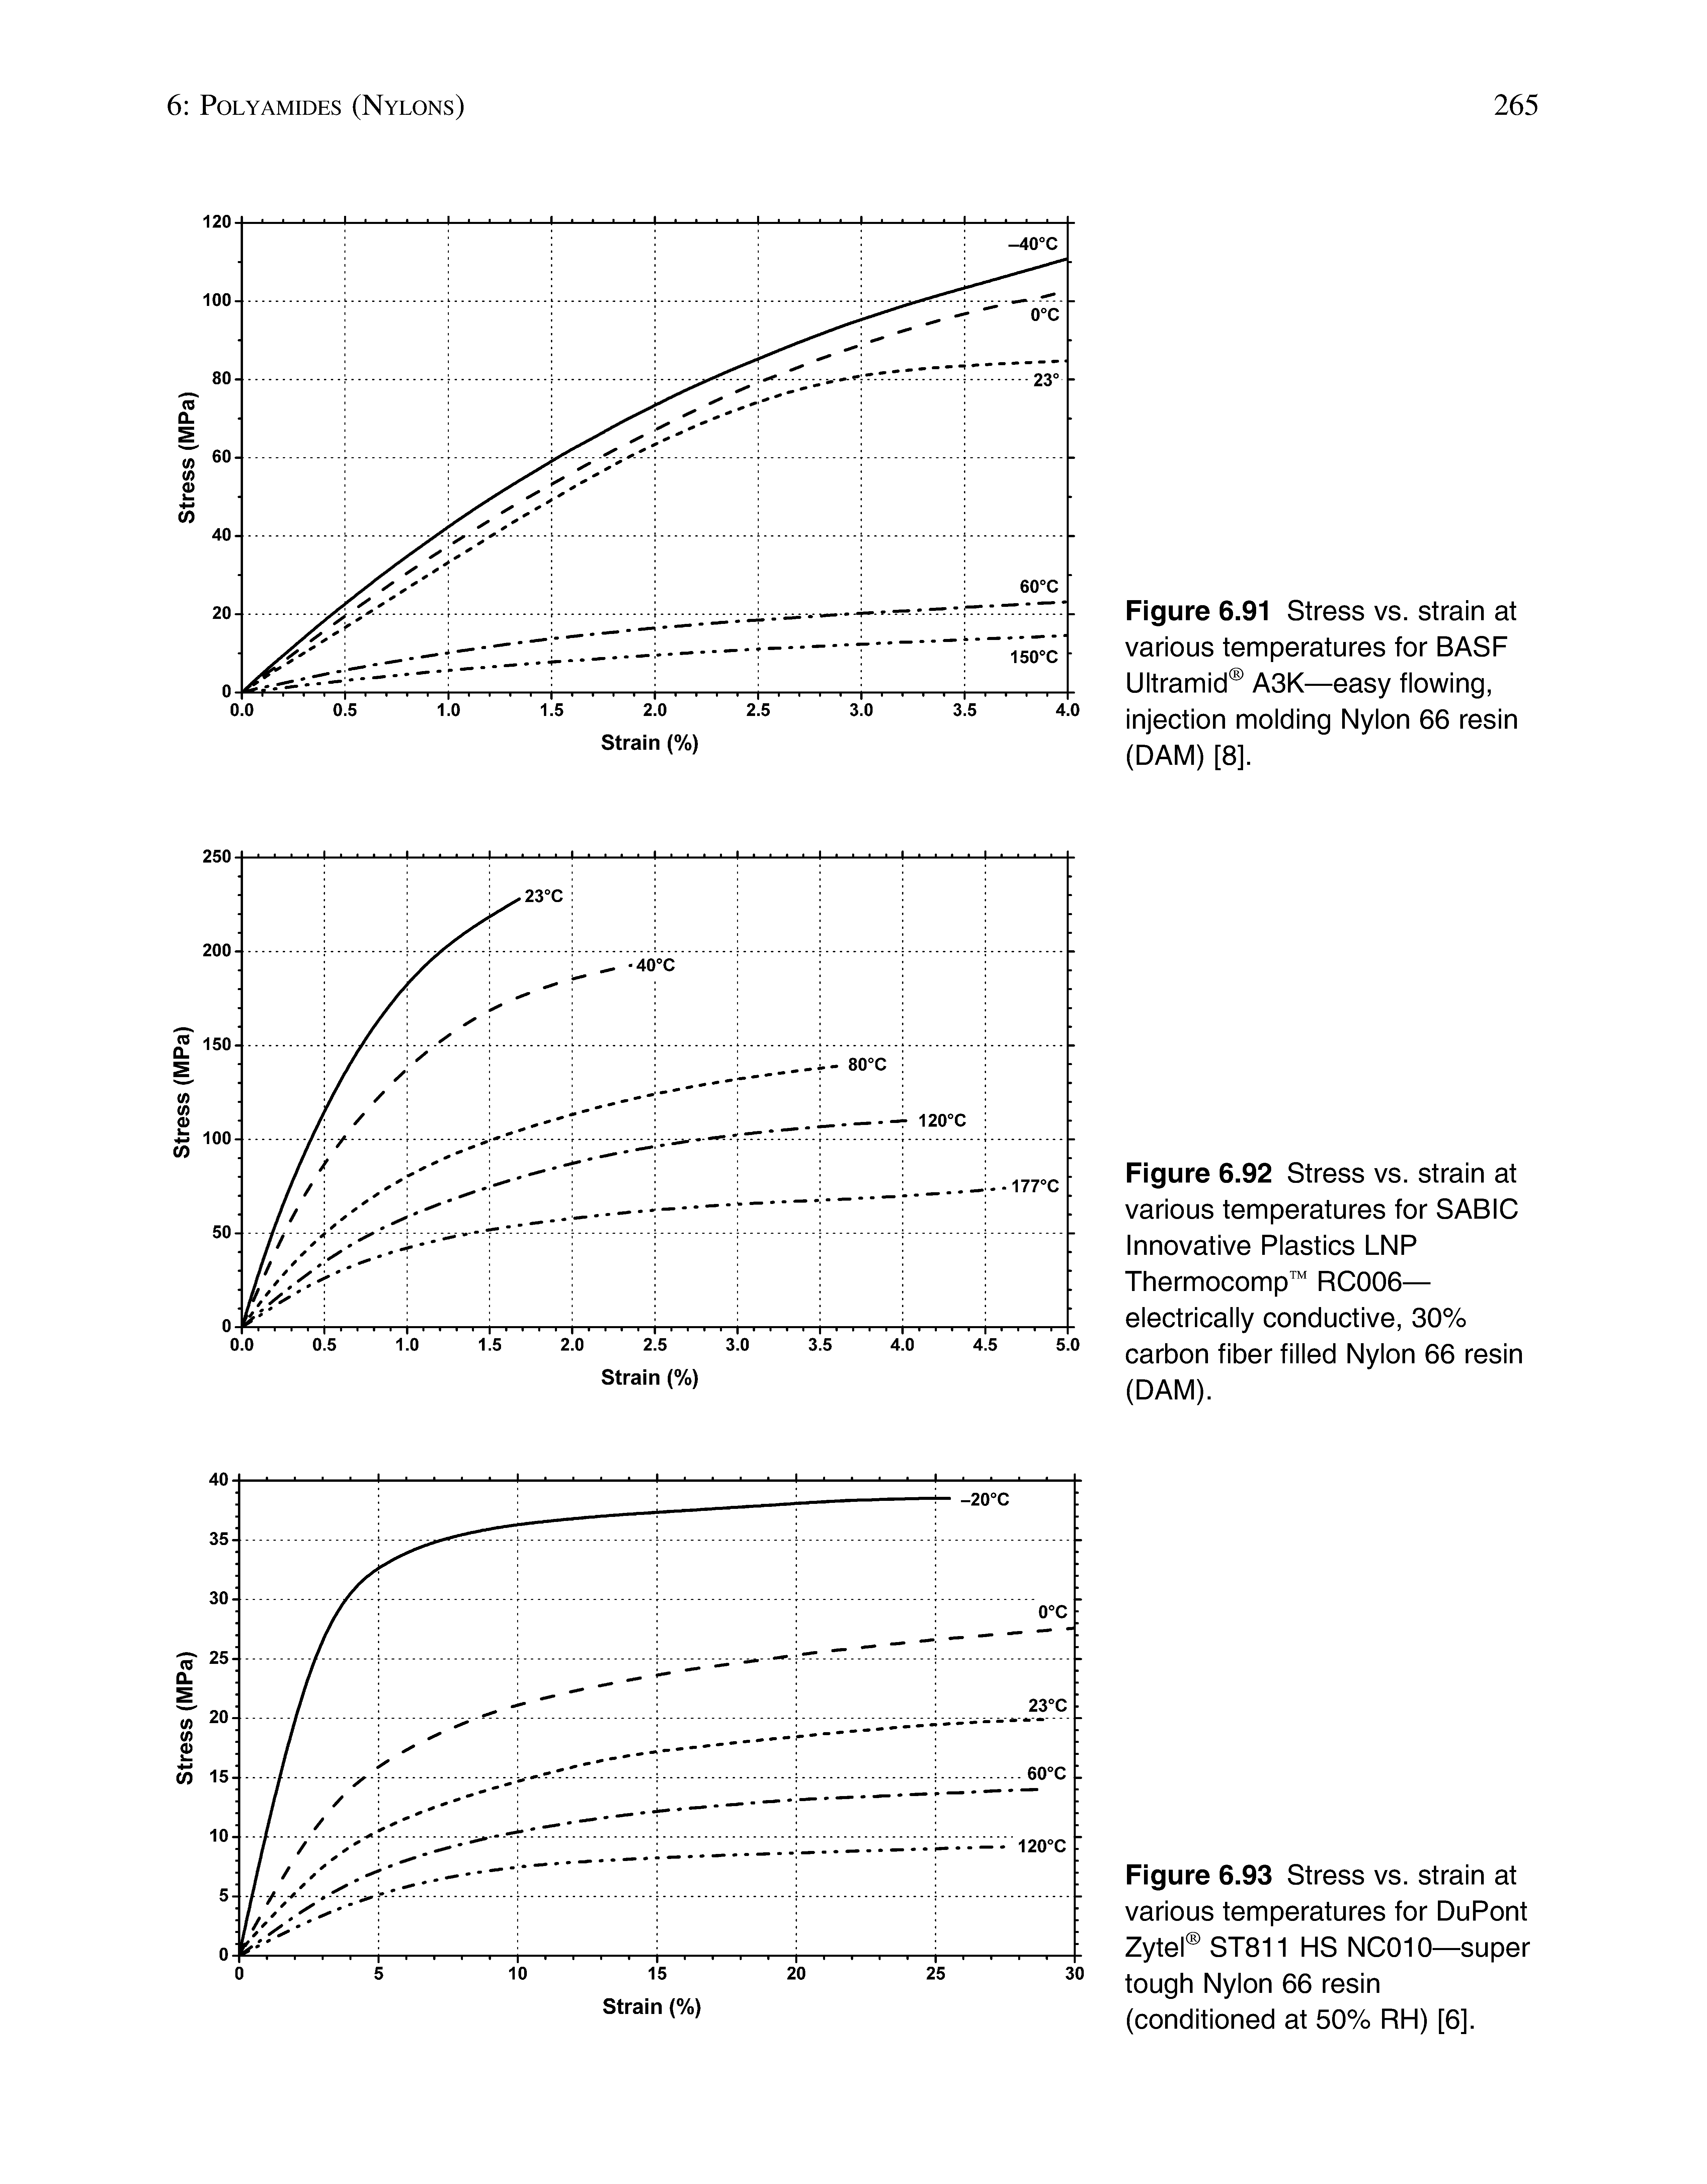 Figure 6.93 Stress vs. strain at various temperatures for DuPont Zytel ST811 HS NC010—super tough Nylon 66 resin (conditioned at 50% RH) [6].